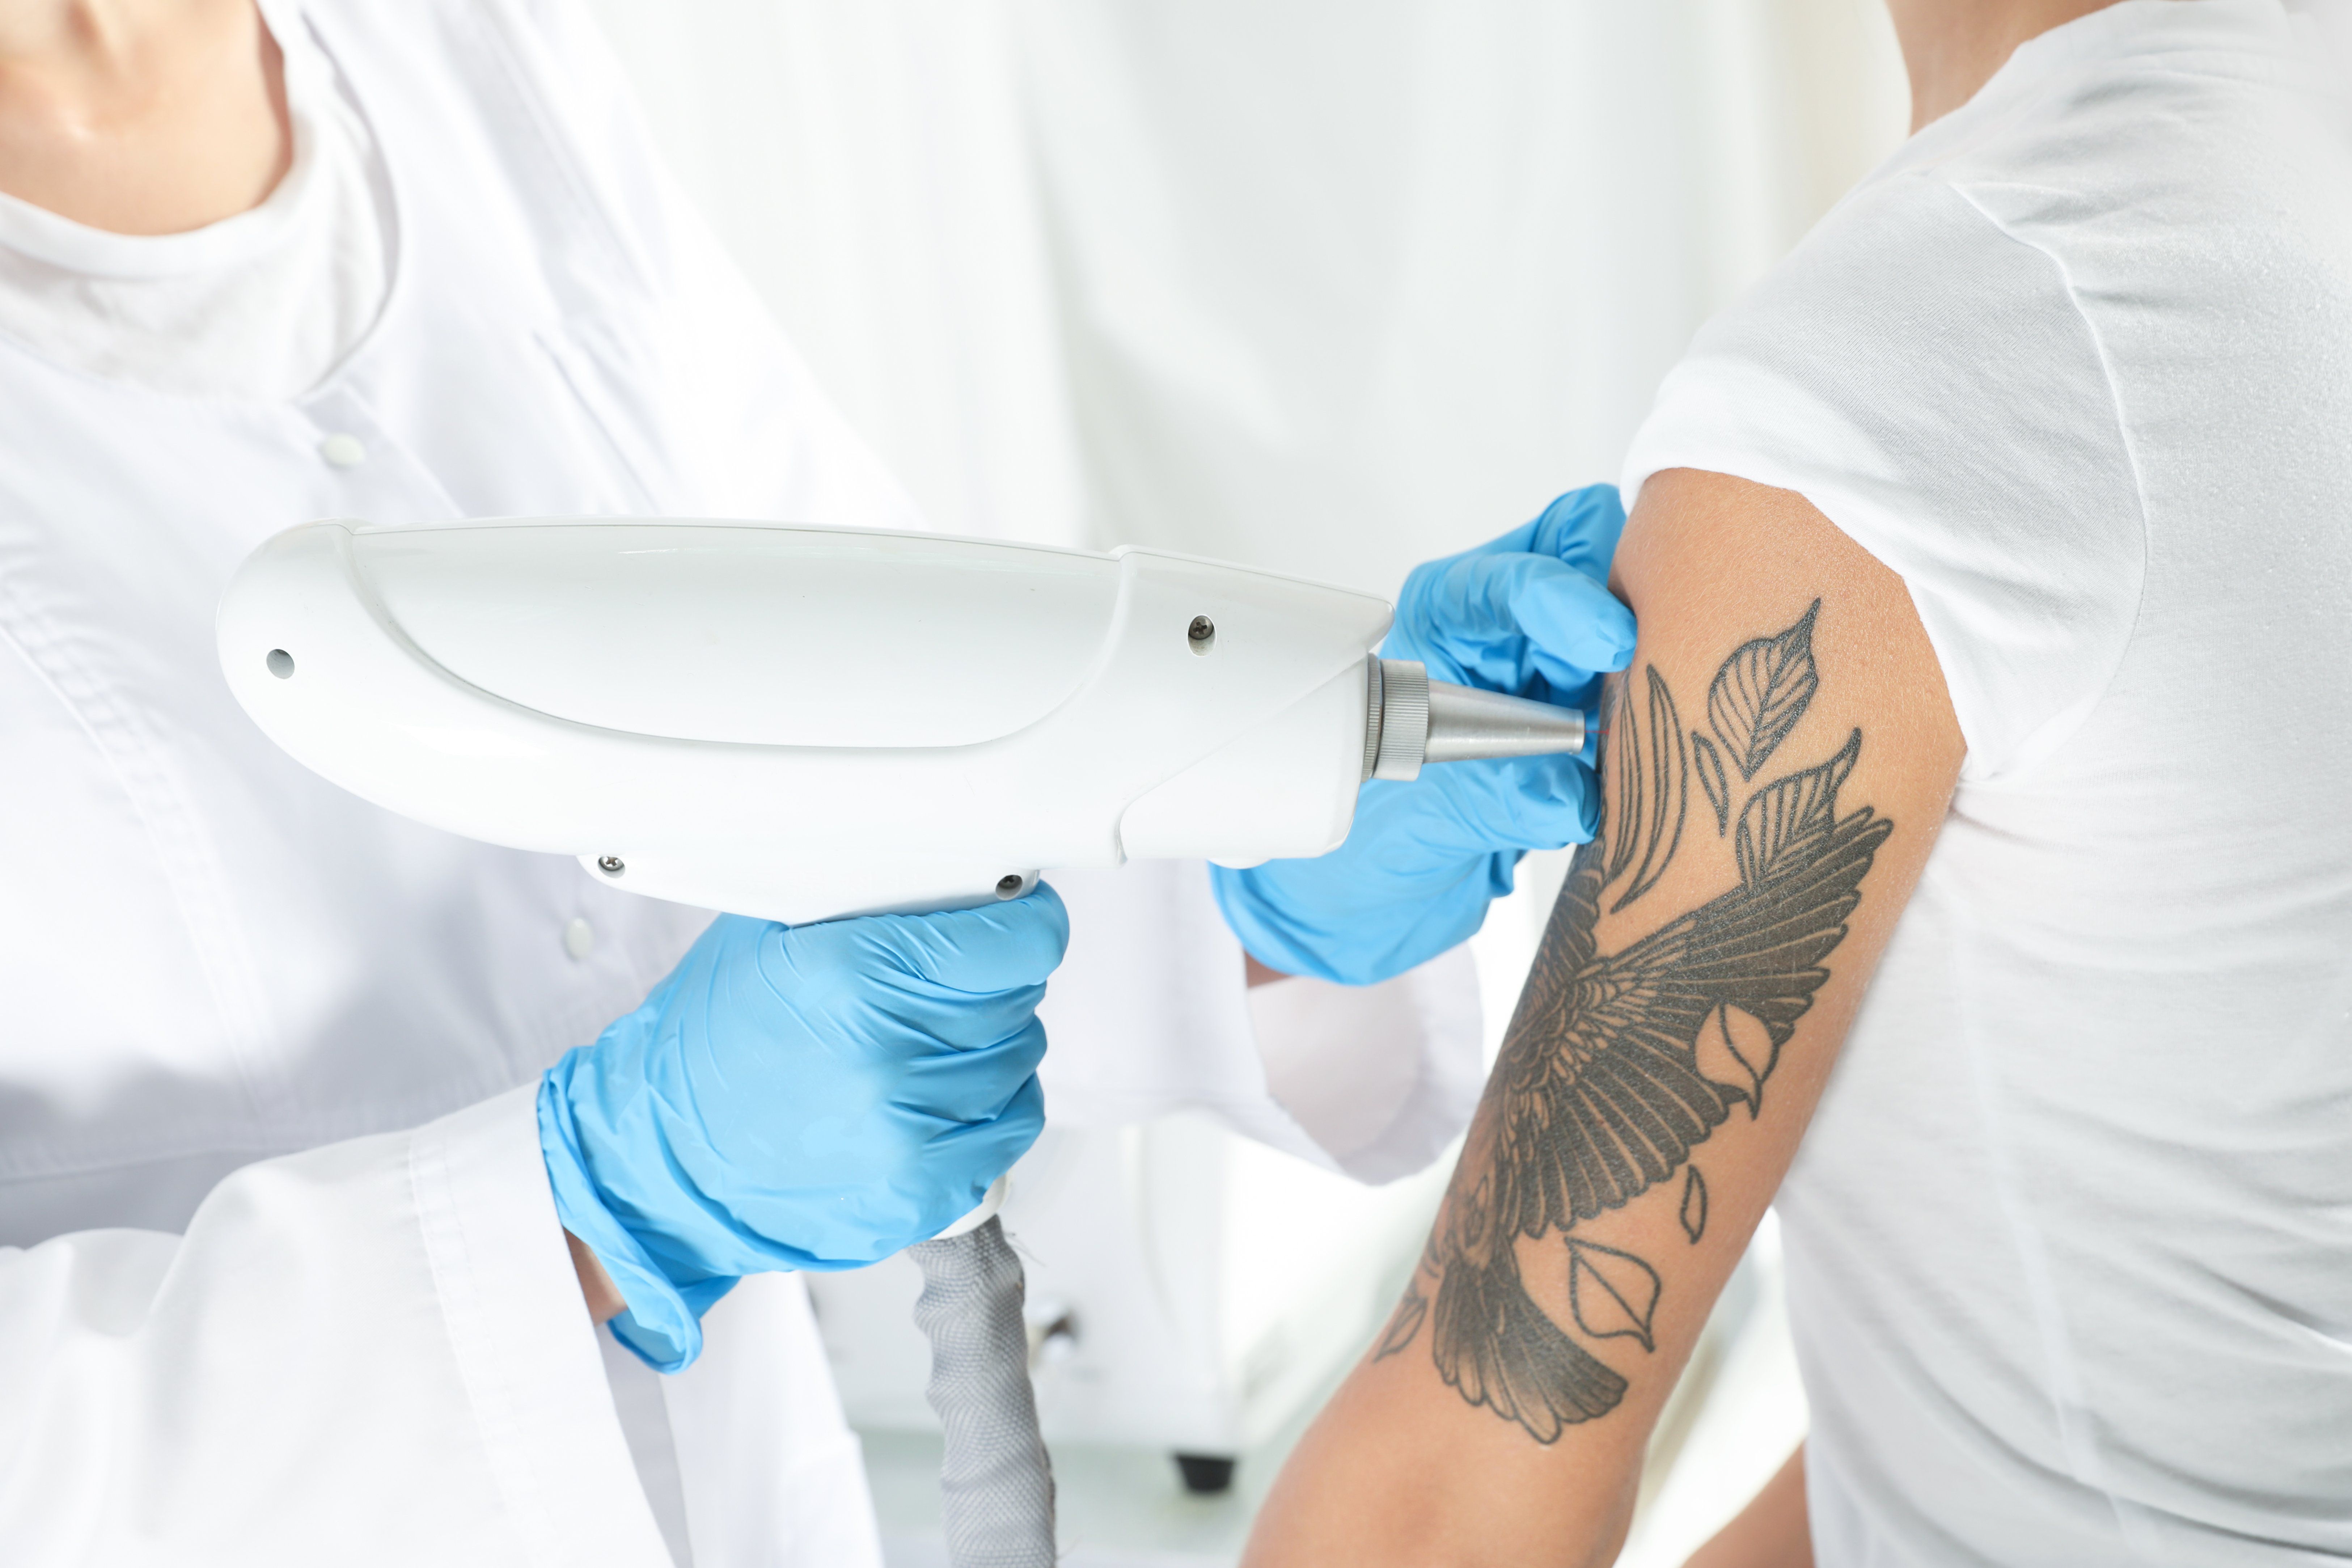 How To Avoid Scarring With Tattoo Removal?